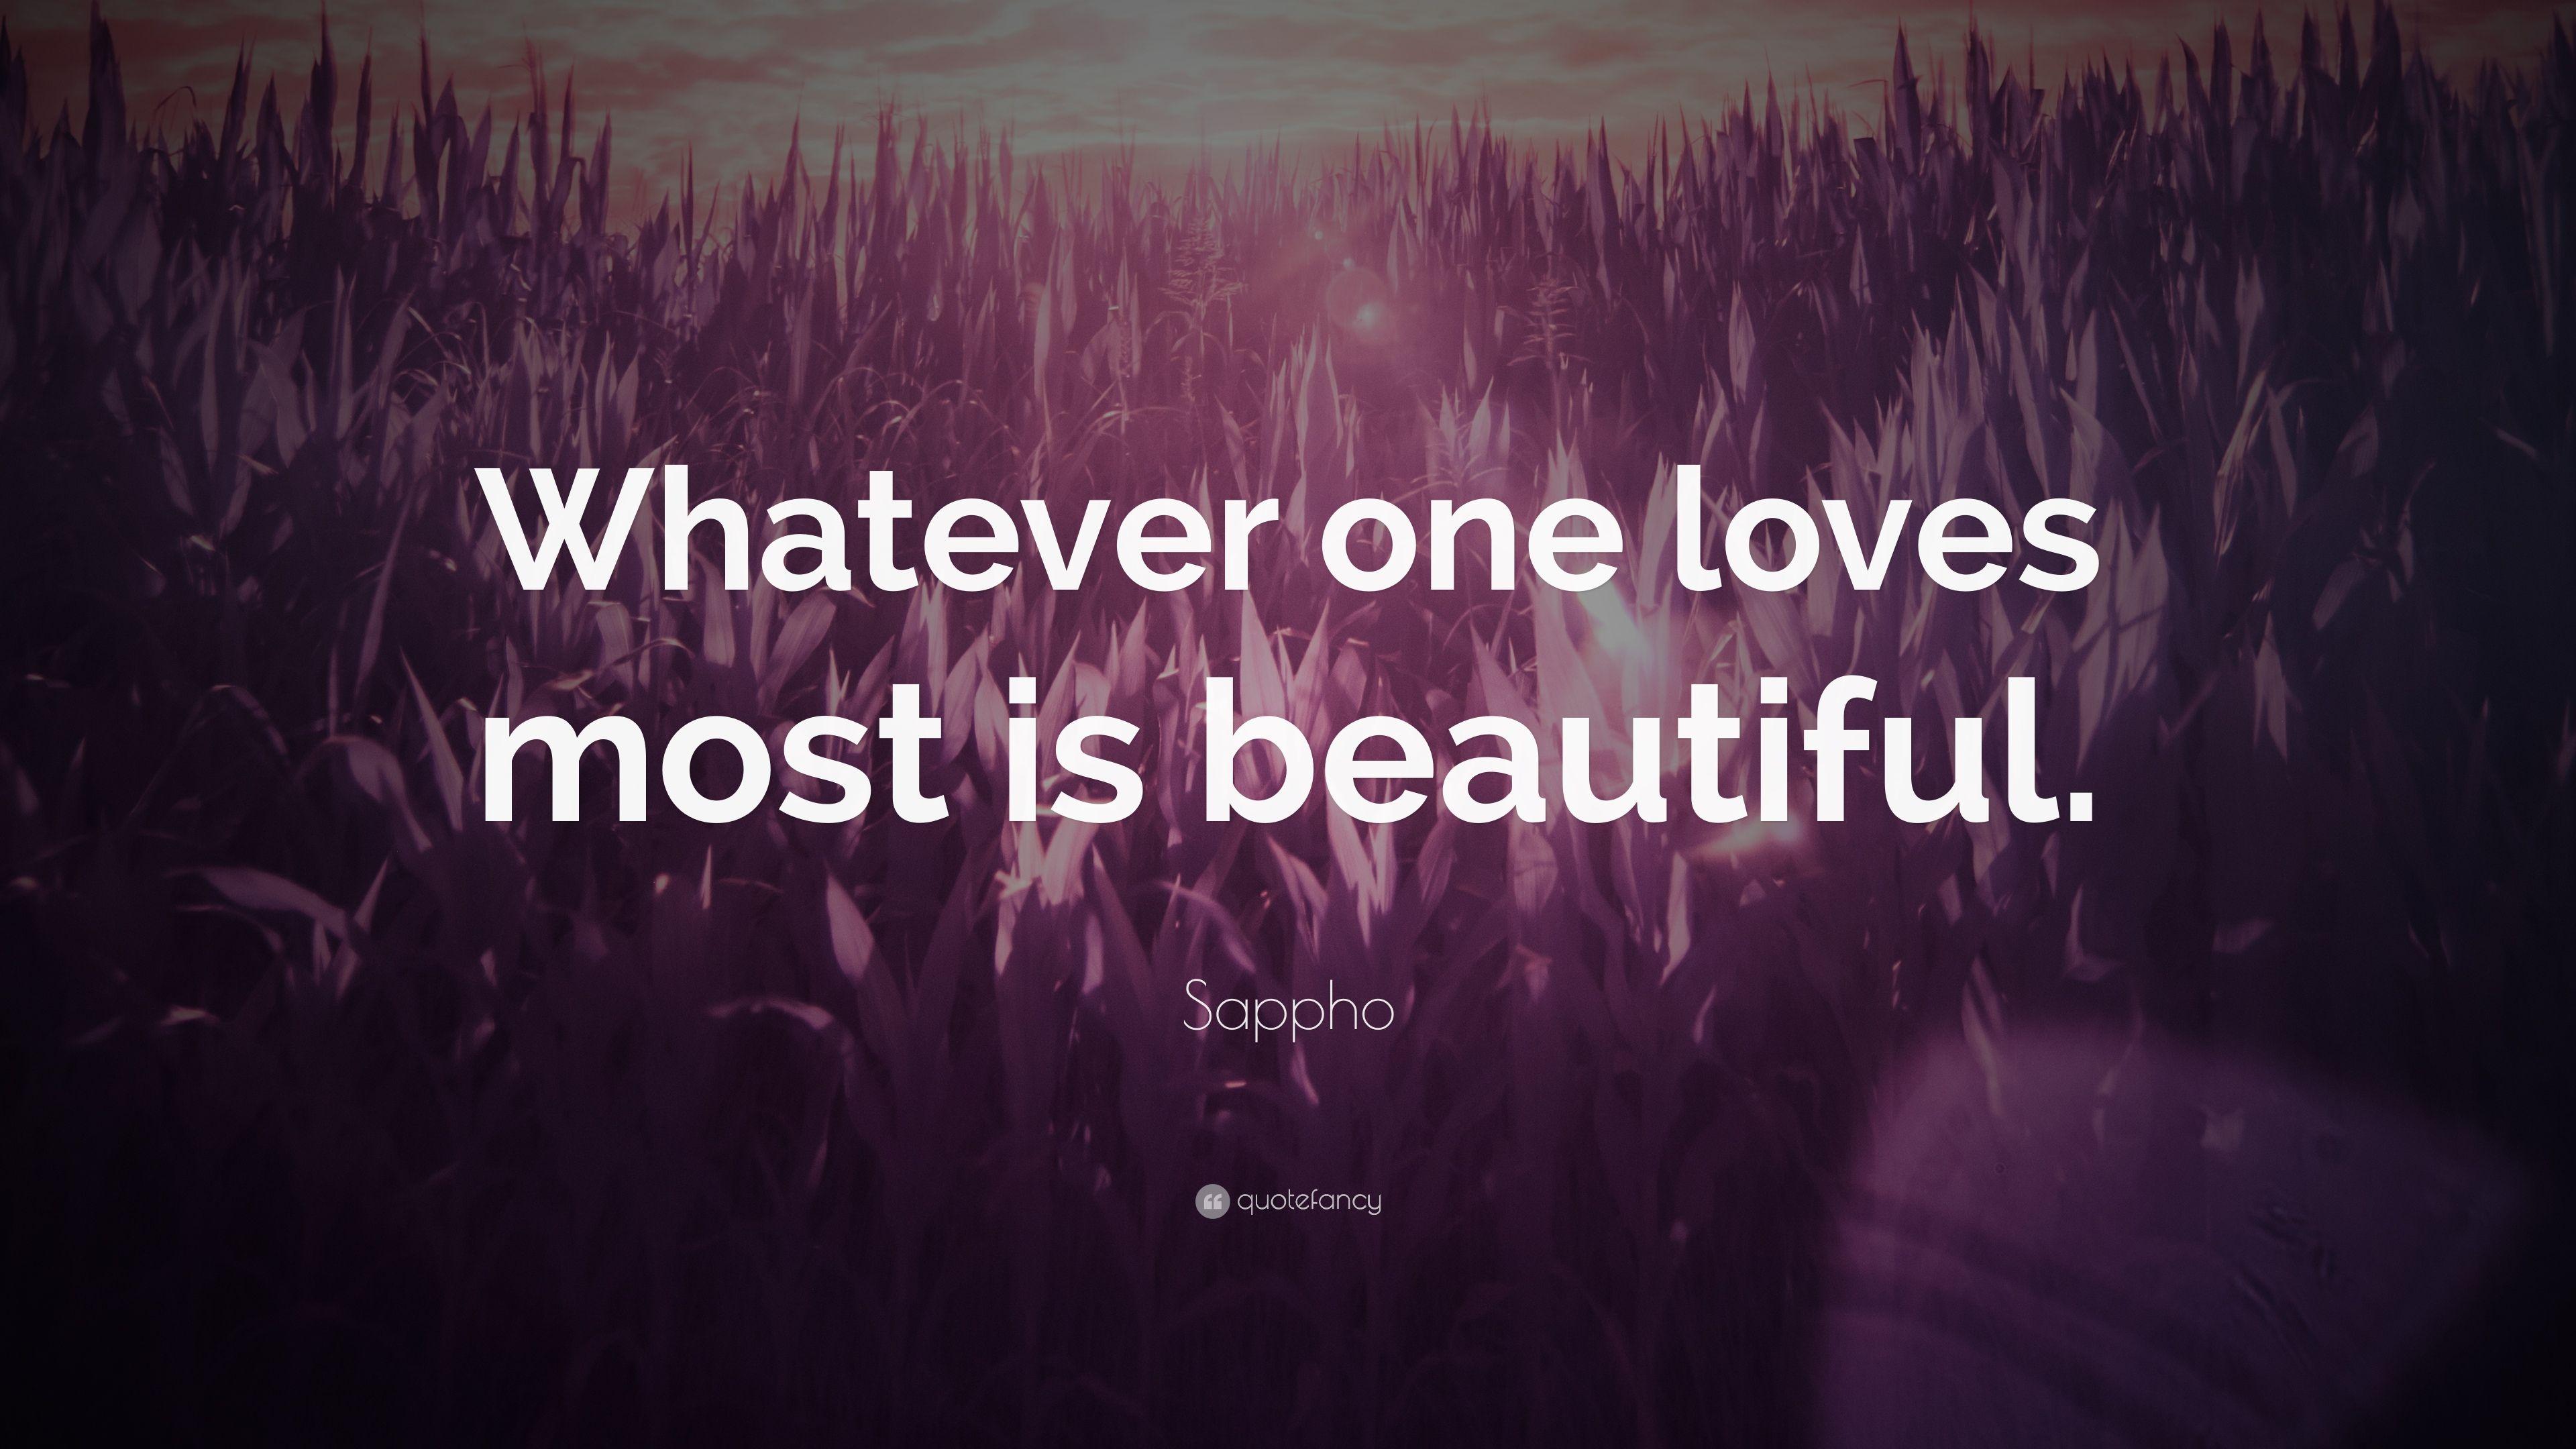 Sappho Quote: “Whatever one loves most is beautiful.” 7 wallpaper